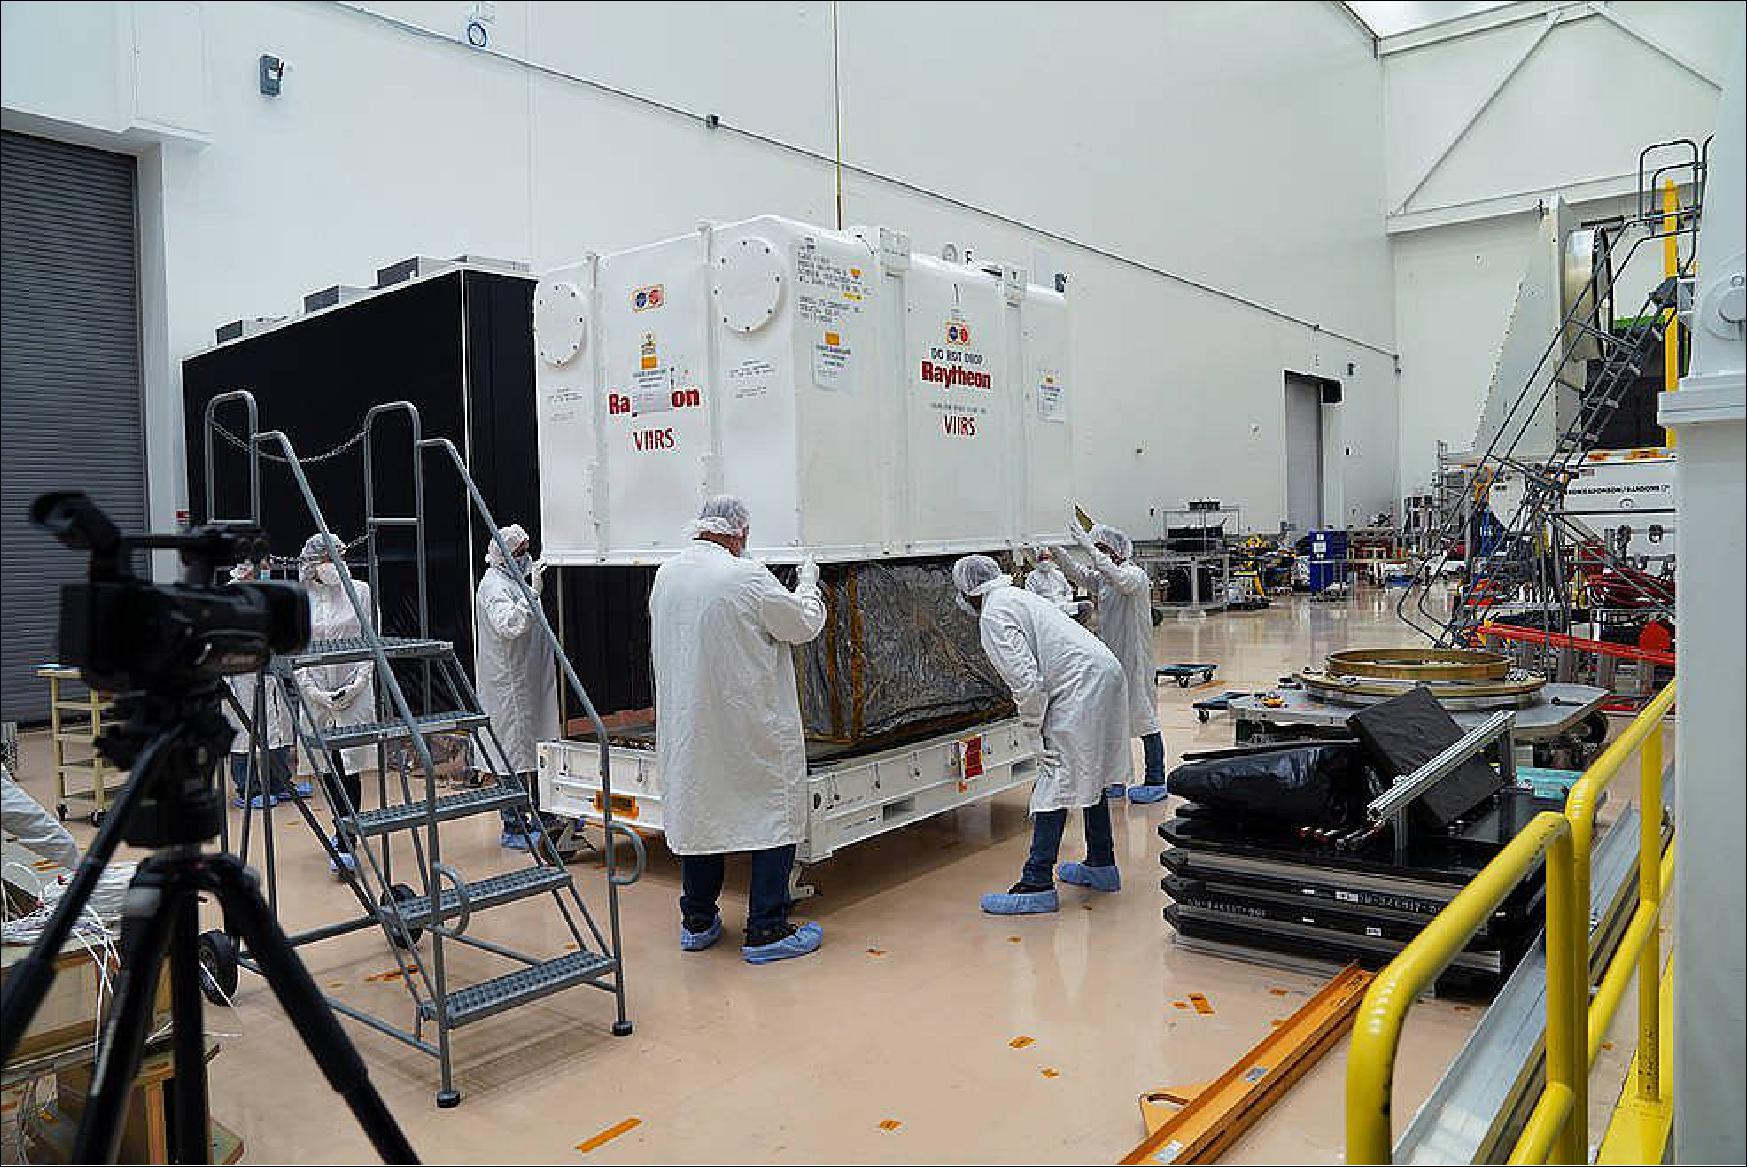 Figure 8: Engineers unpack the VIIRS instrument from its protective shipping container at Northrop Grumman’s spacecraft facility in Gilbert, Arizona (image credit: Northrop Grumman)